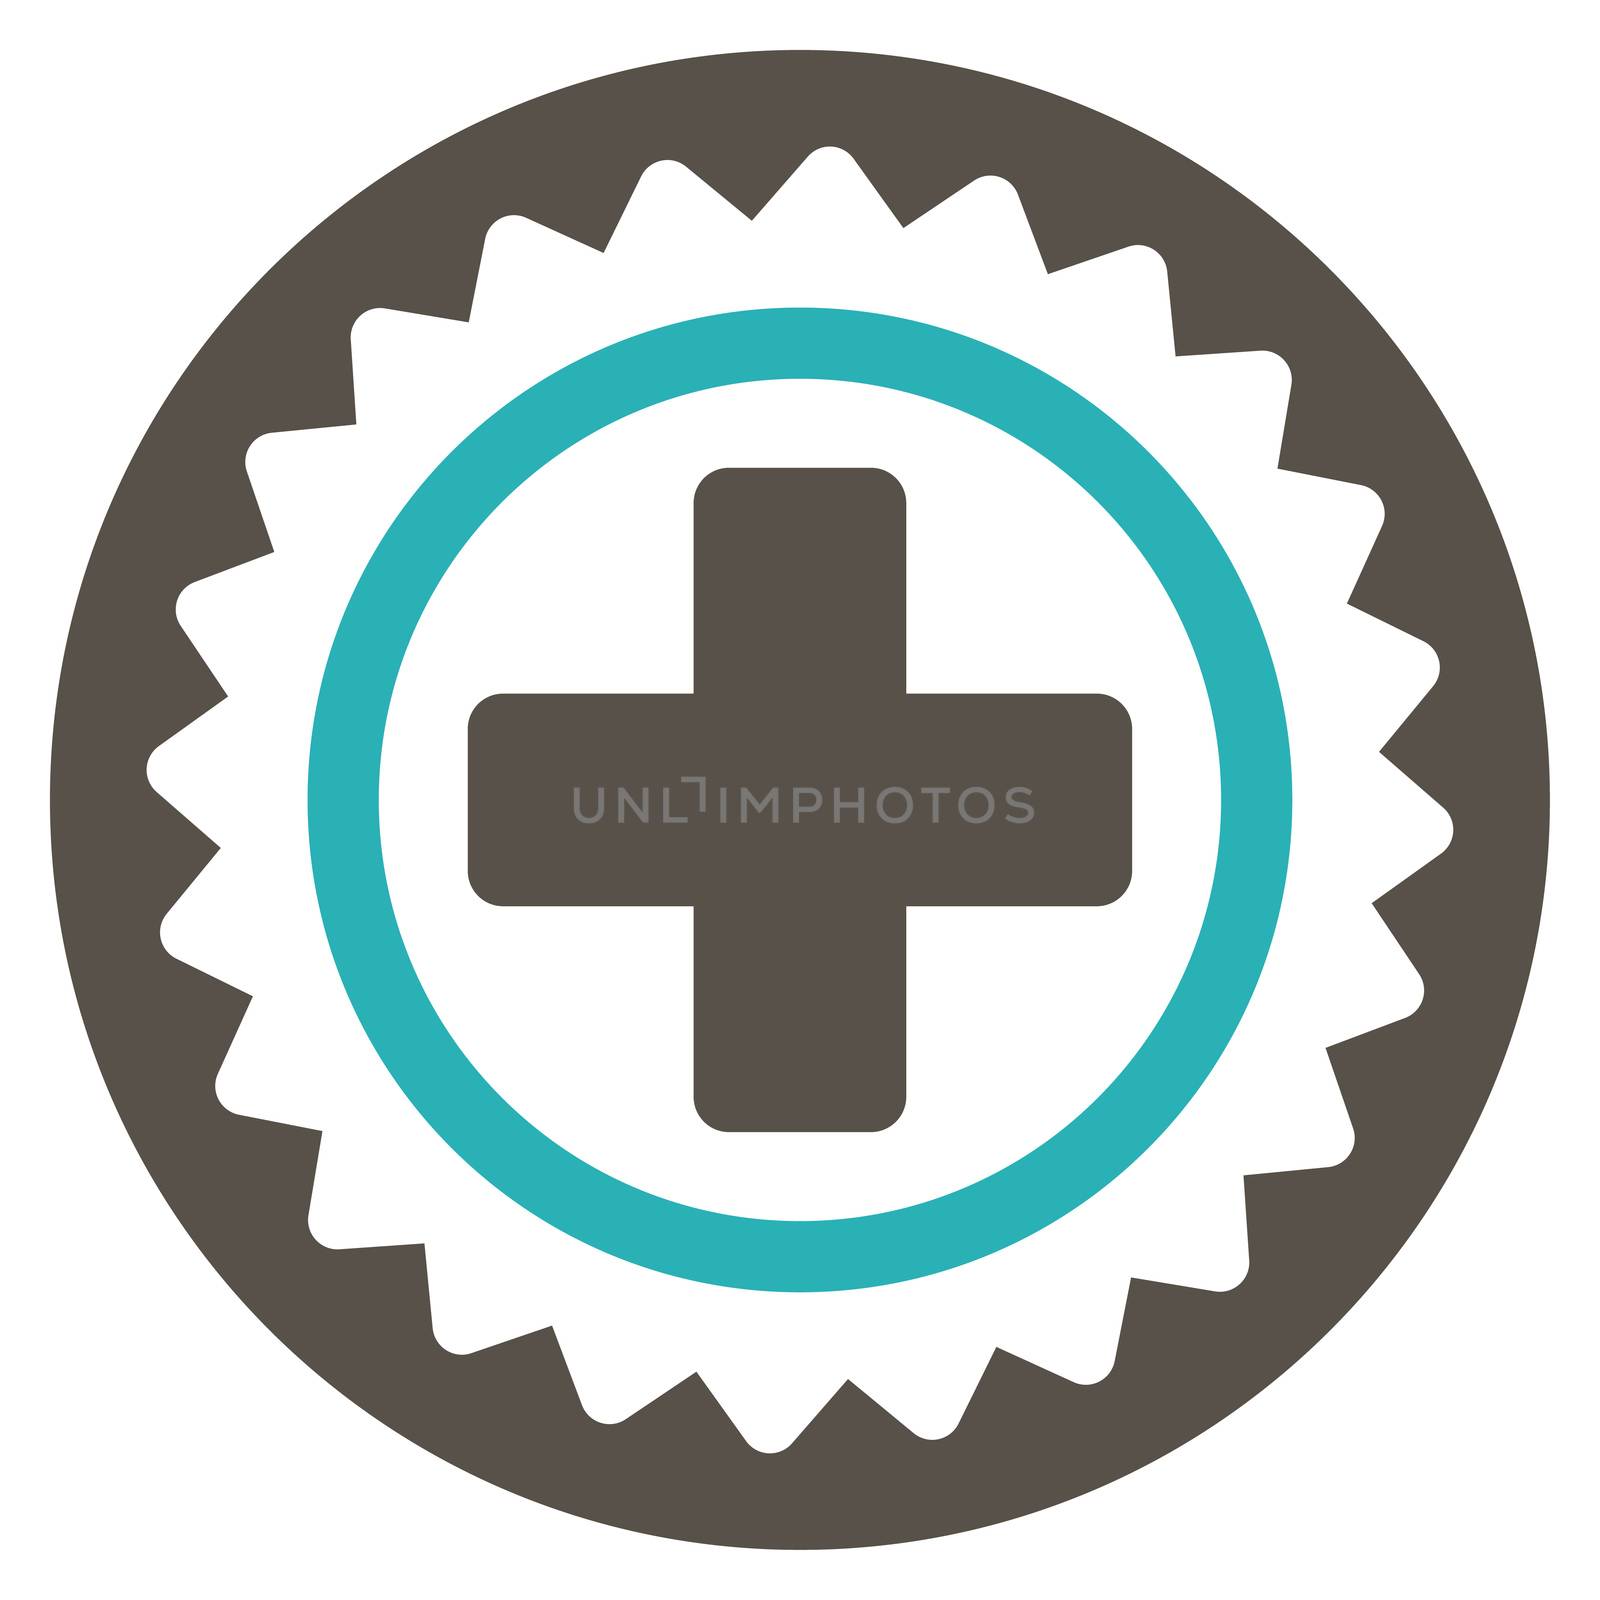 Medical Stamp raster icon. Style is bicolor flat symbol, grey and cyan colors, rounded angles, white background.